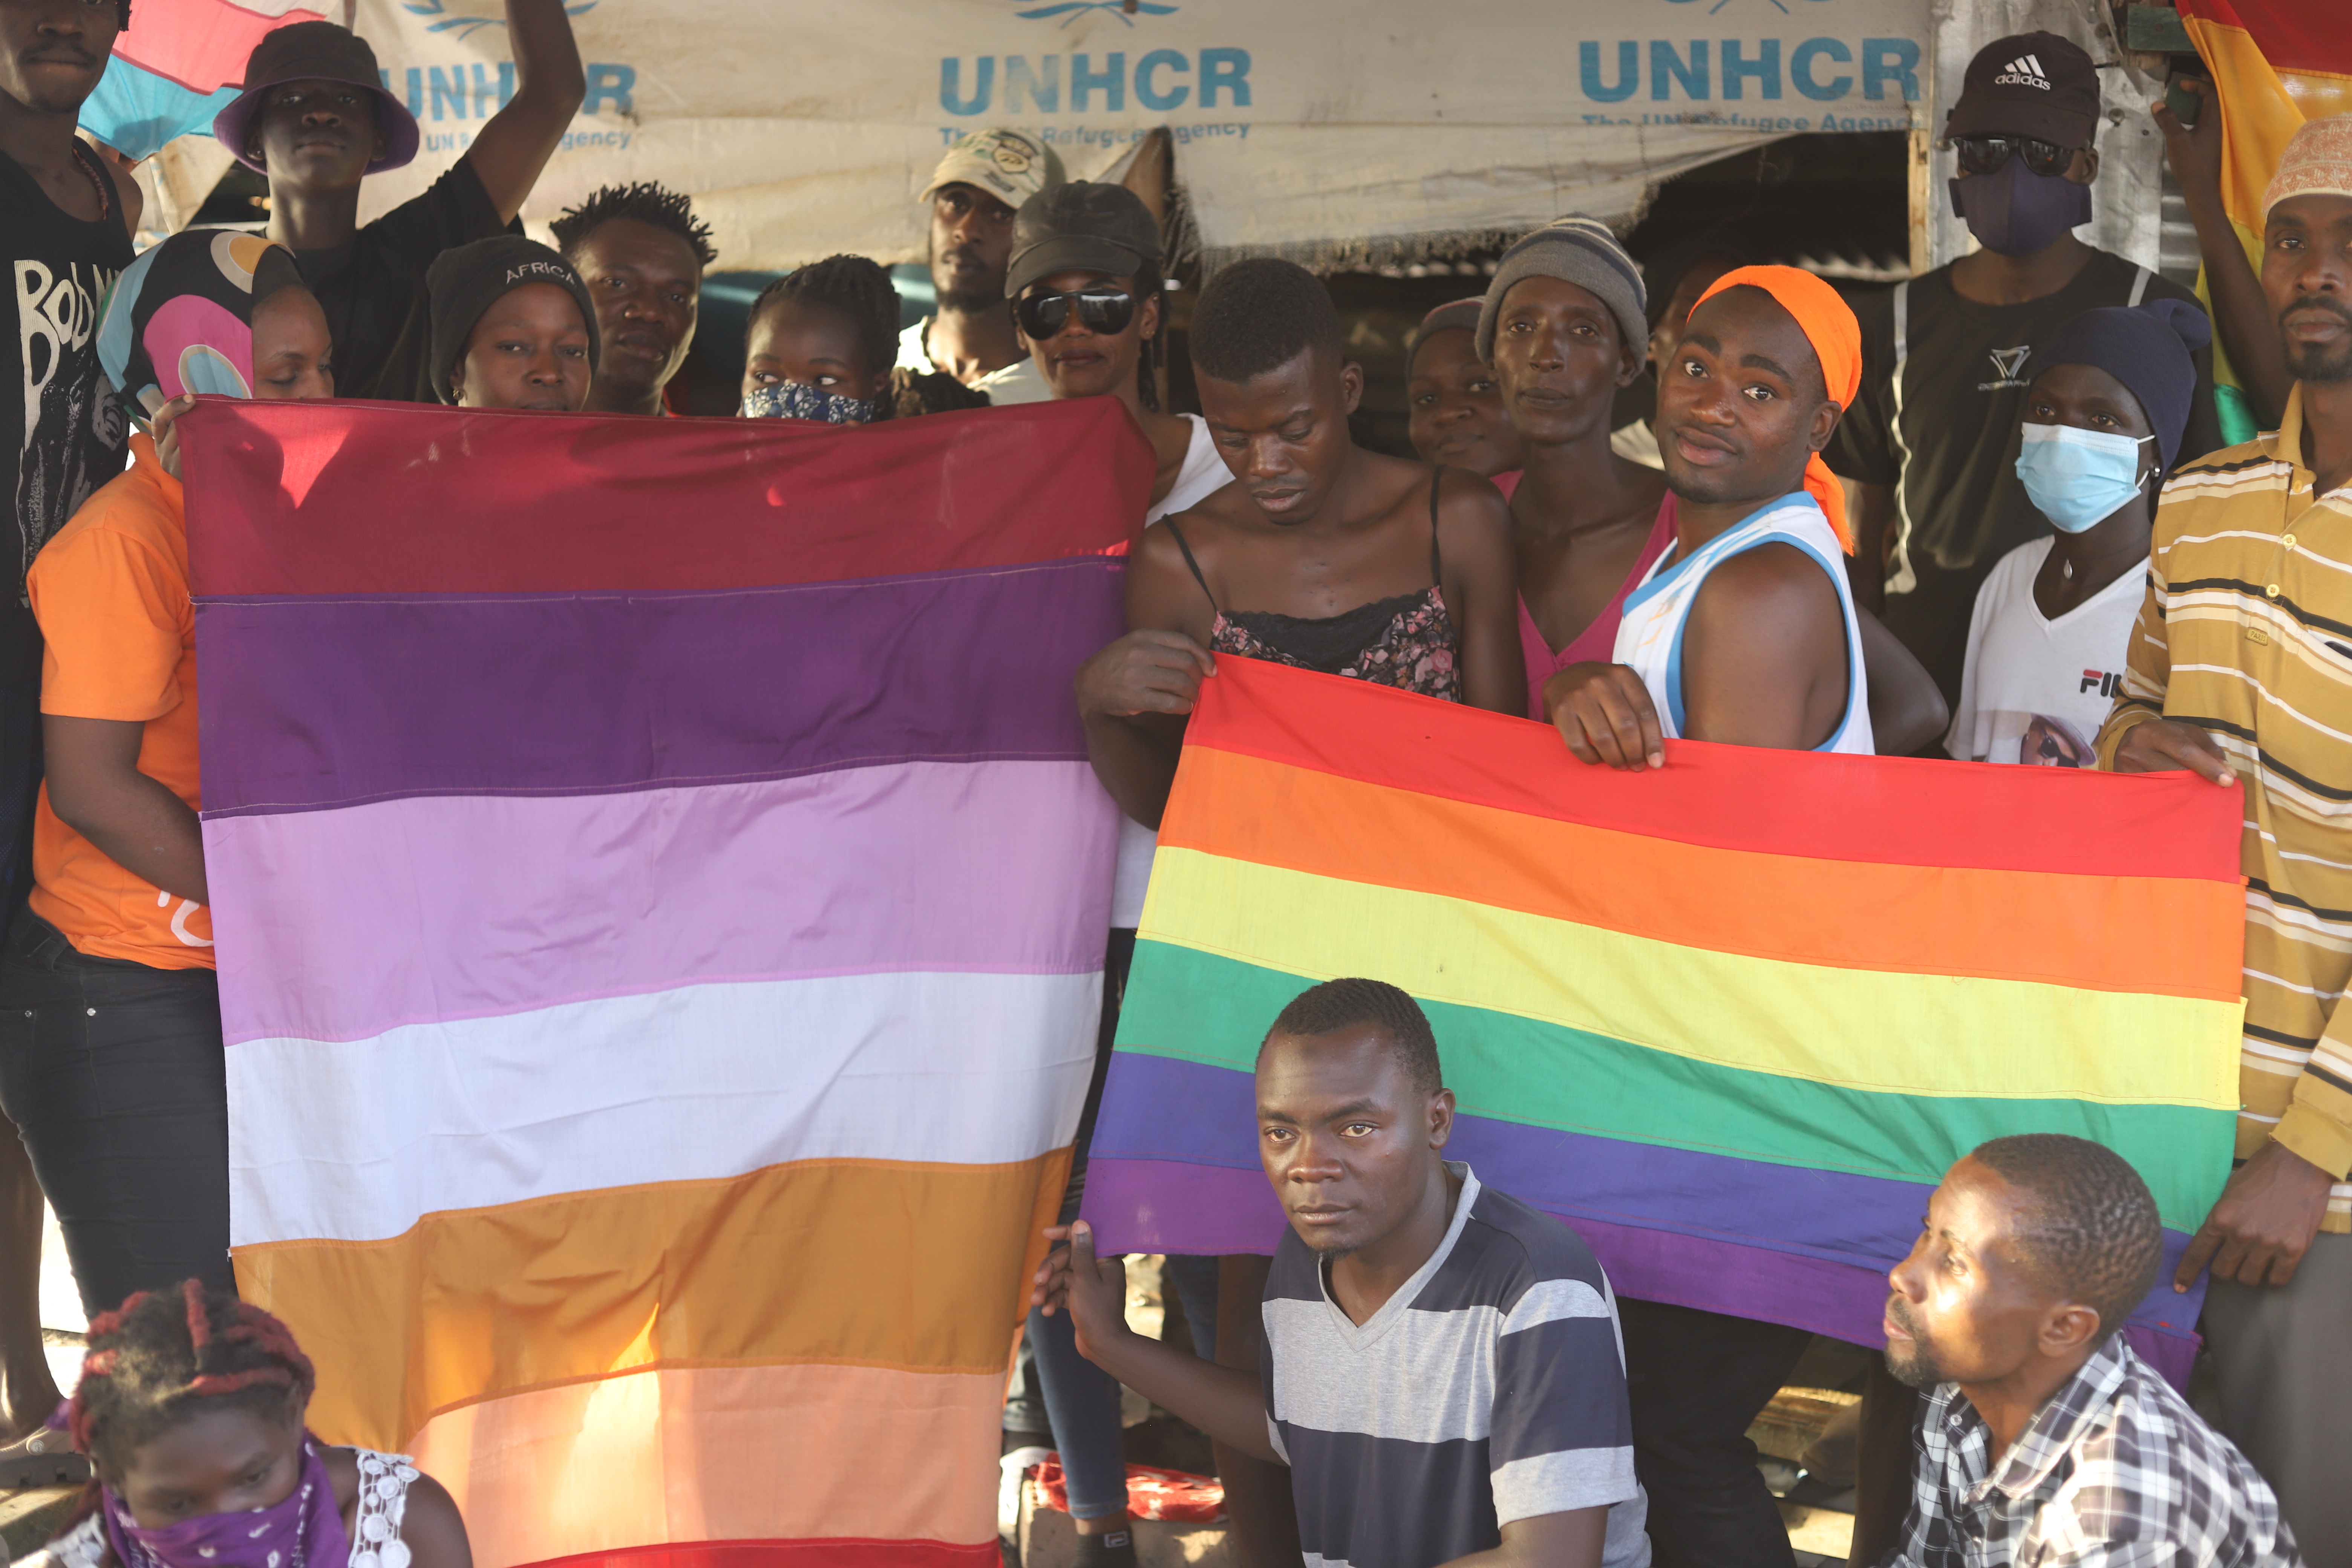 LGBTQ refugees in Kakuma Refugee Camp, located in Kenya's northwestern region, hold their rainbow flags as they pose for a photo on Feb. 18. (NCR photo/Doreen Ajiambo)